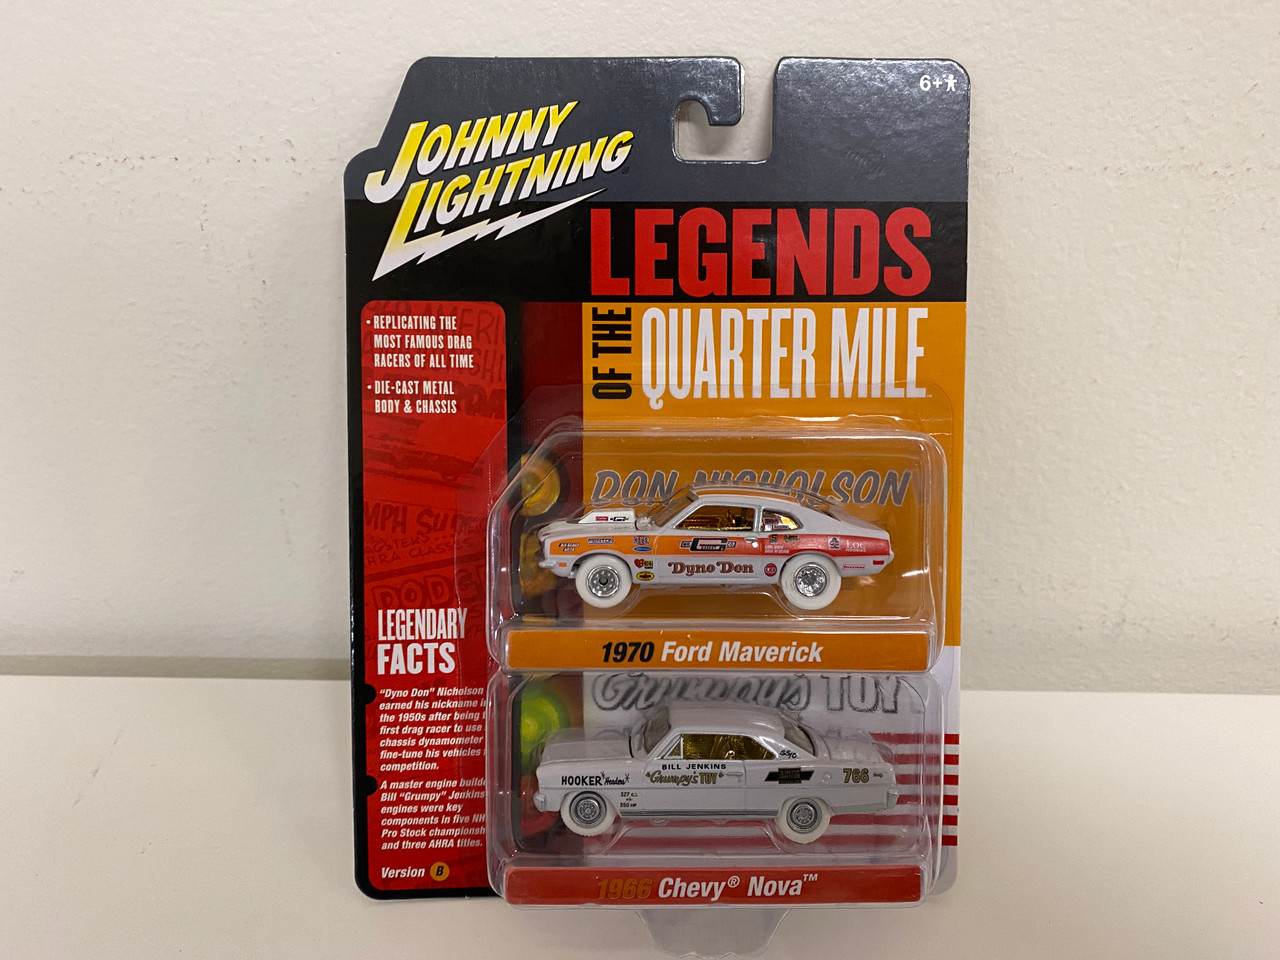 CHASE CARS WHITE LIGHTNING 1970 Ford Maverick Red Orange and Black "Dyno" Don Nicholson and 1966 Chevrolet Nova Red and White Bill "Grumpy" Jenkins "Legends of the Quarter Mile" Series Set of 2 Cars 1/64 Diecast Model Cars by Johnny Lightning